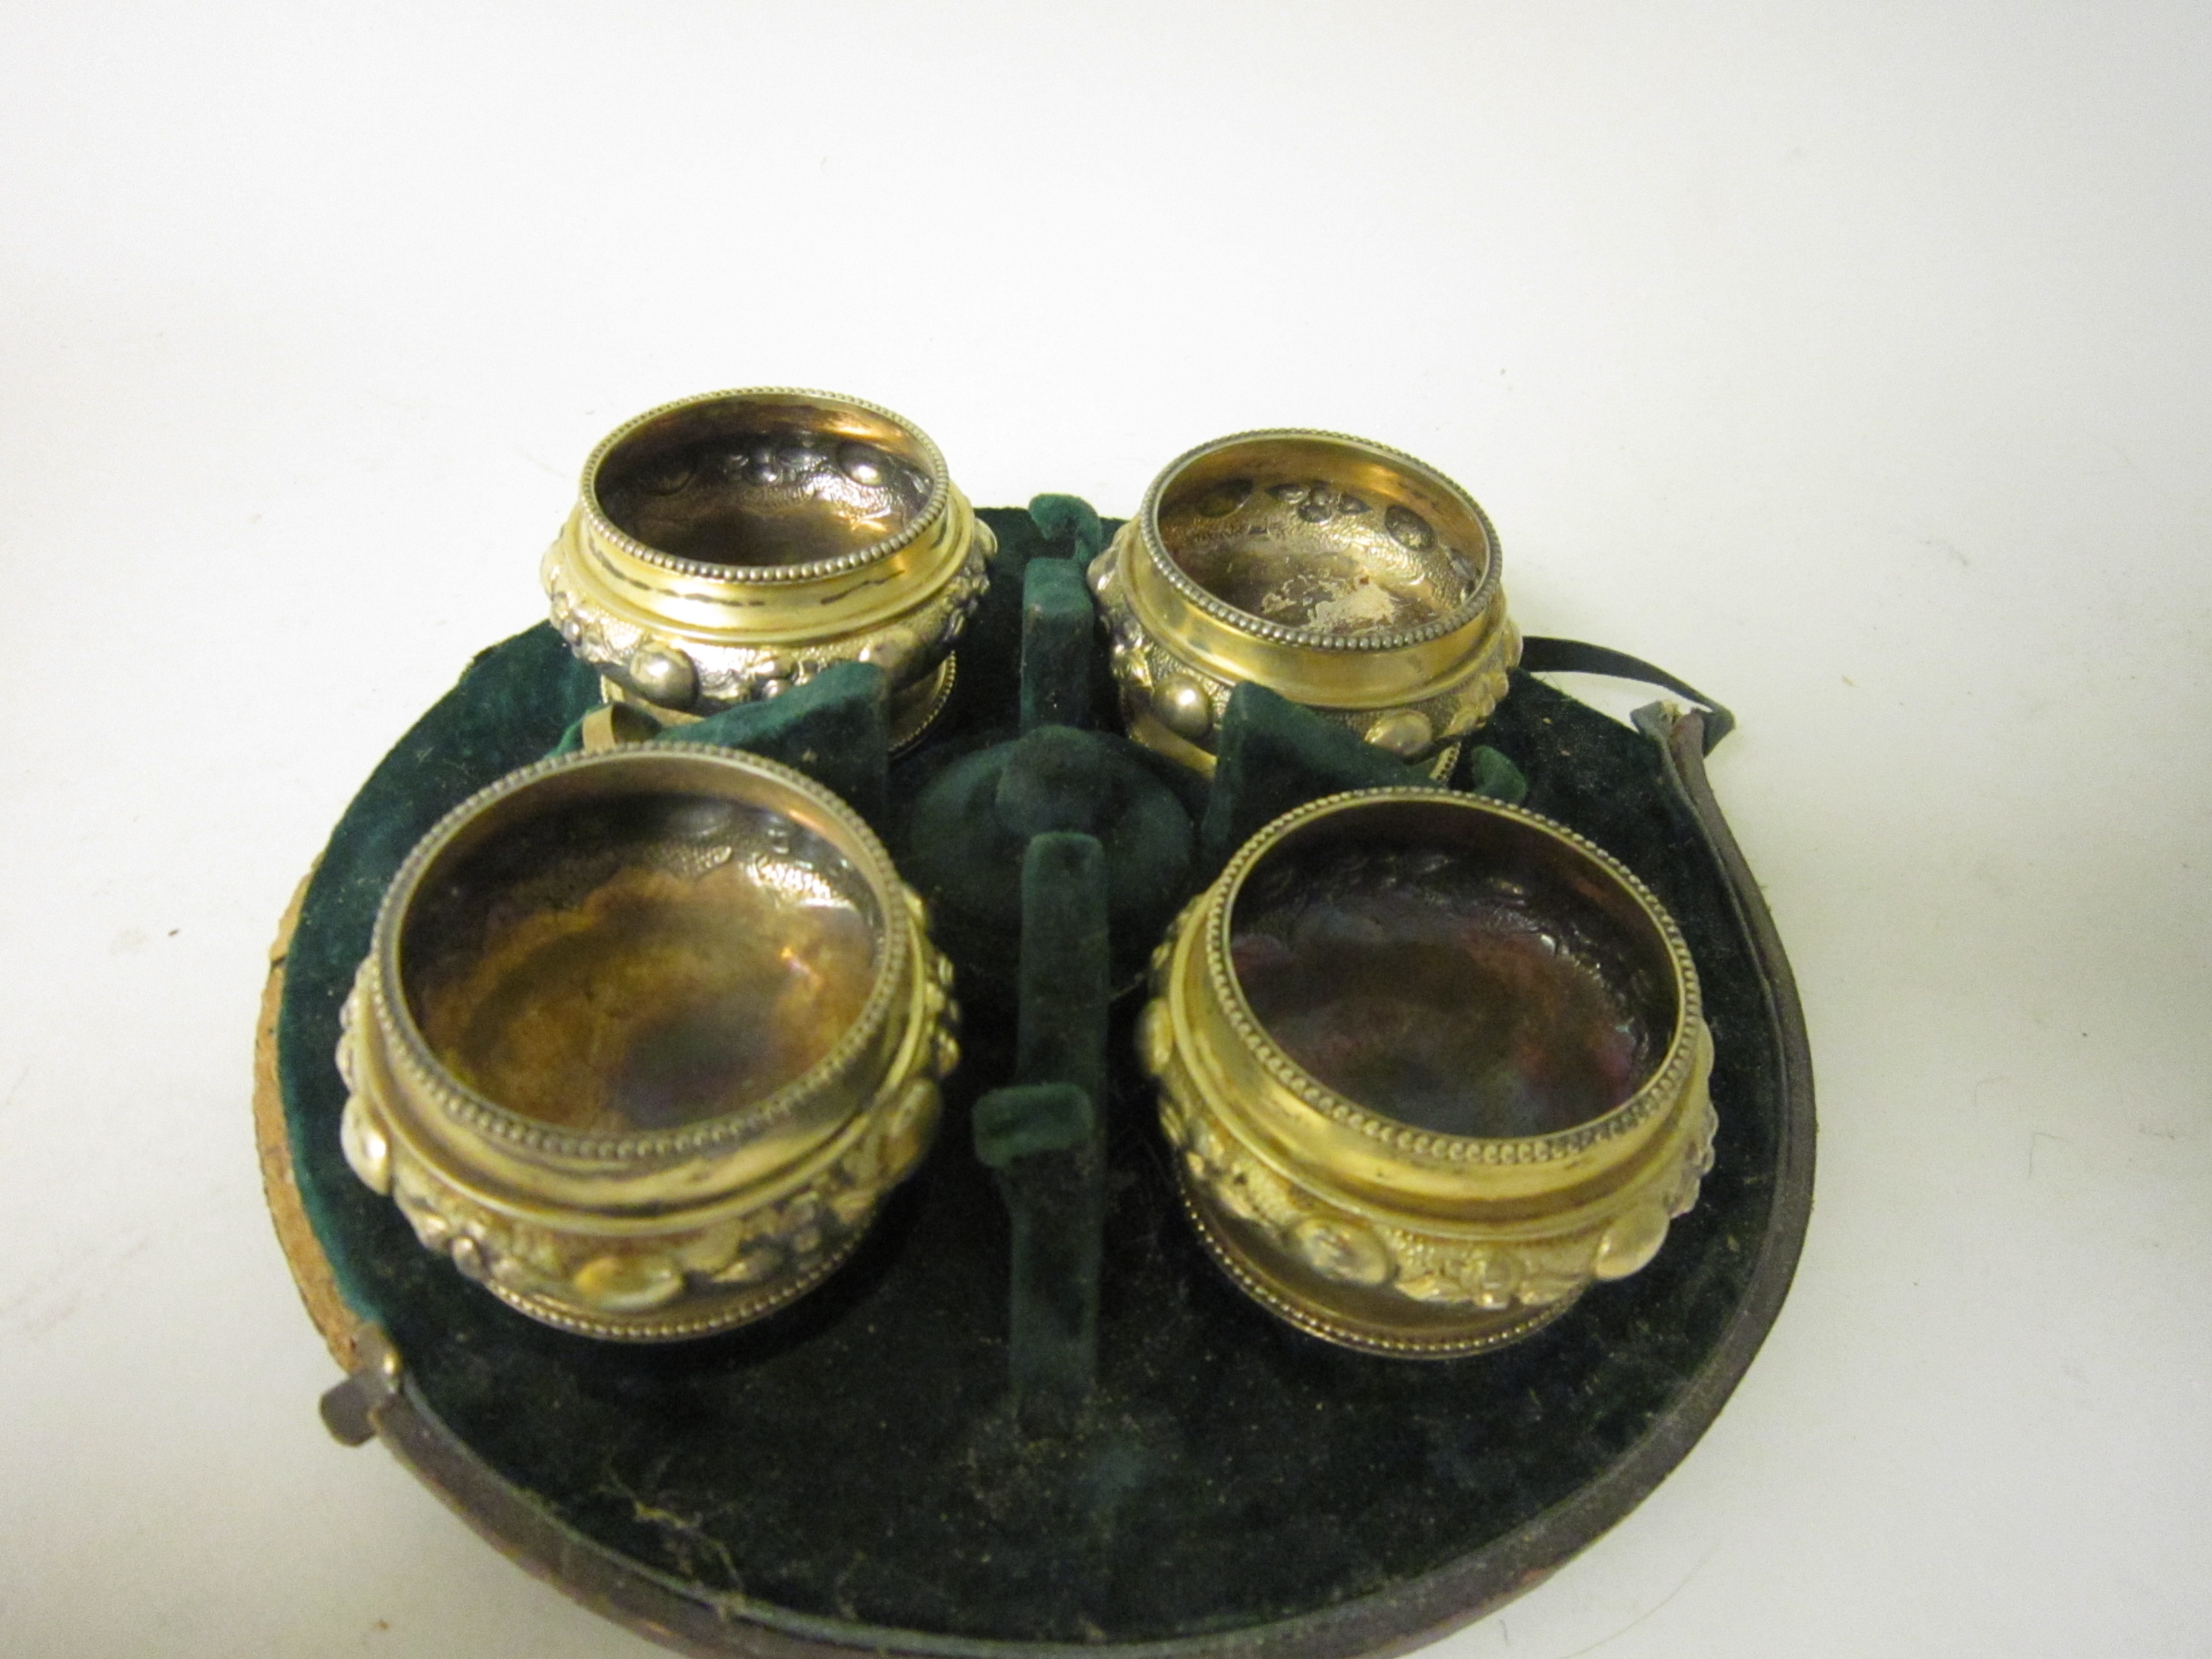 A set of four Victorian silver-gilt circular Salts with embossed friezes and beaded rims, London